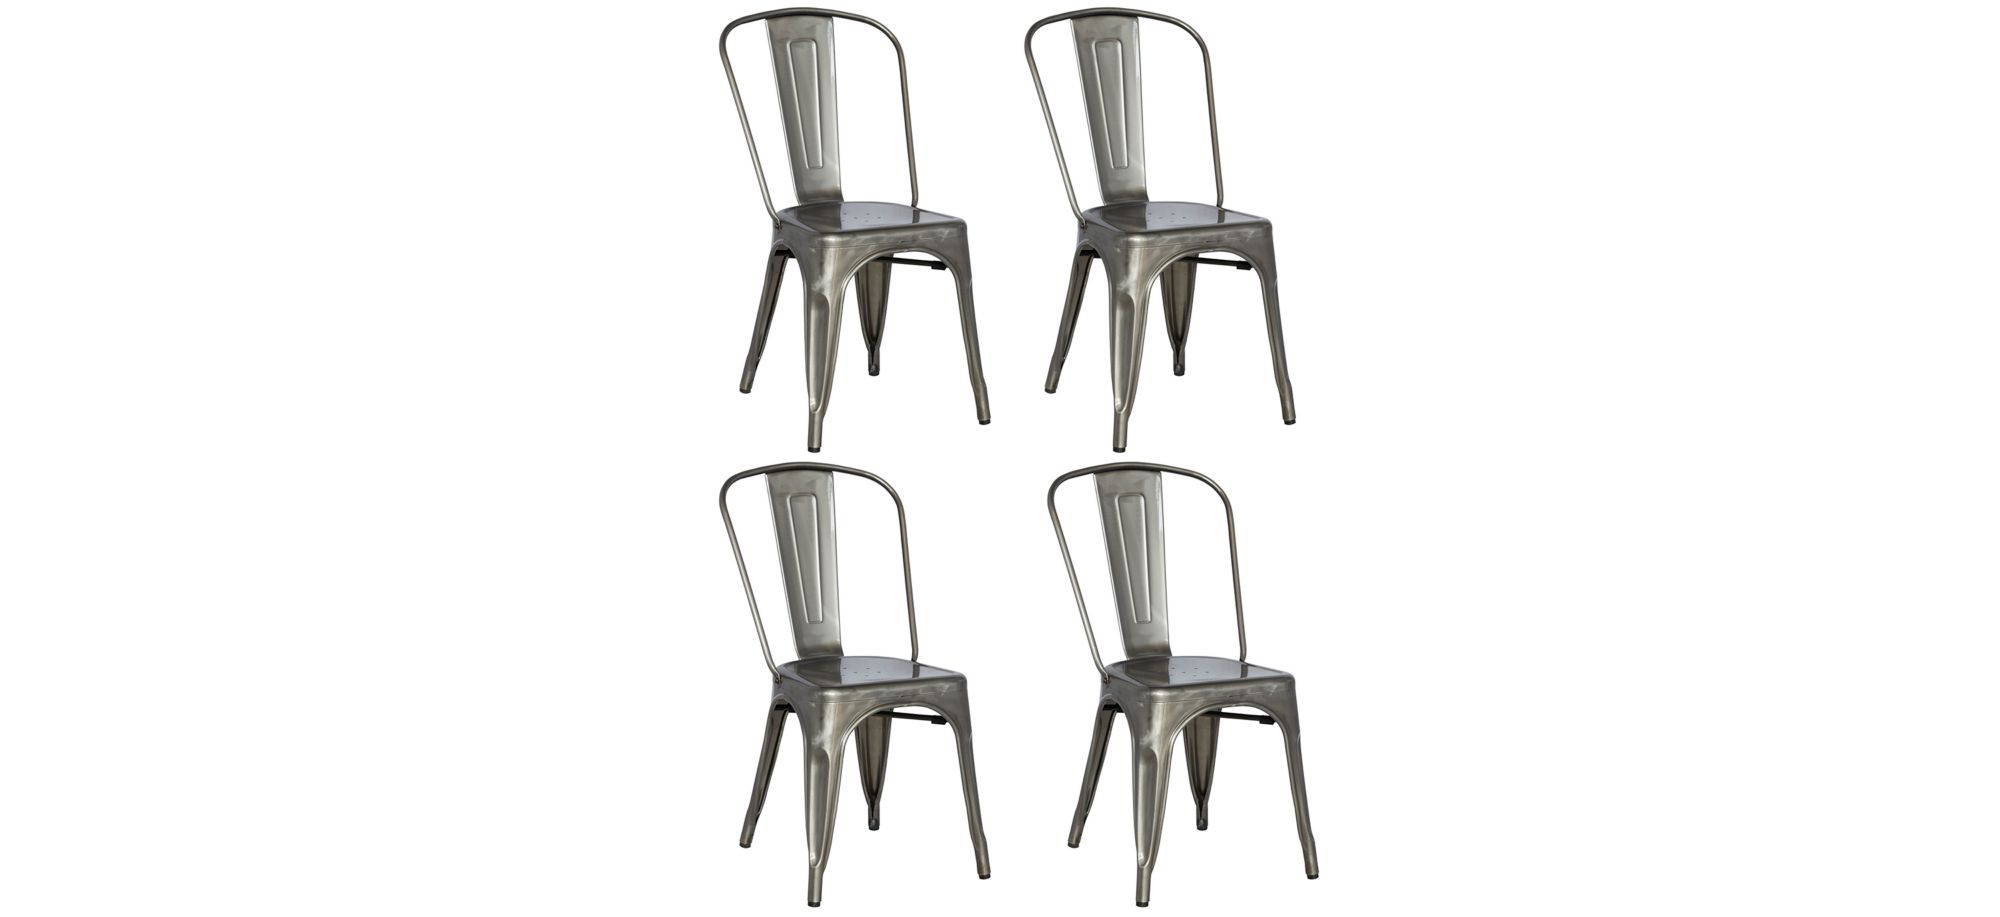 Felix Dining Chairs - Set of 4 in Gun Metal by Chintaly Imports